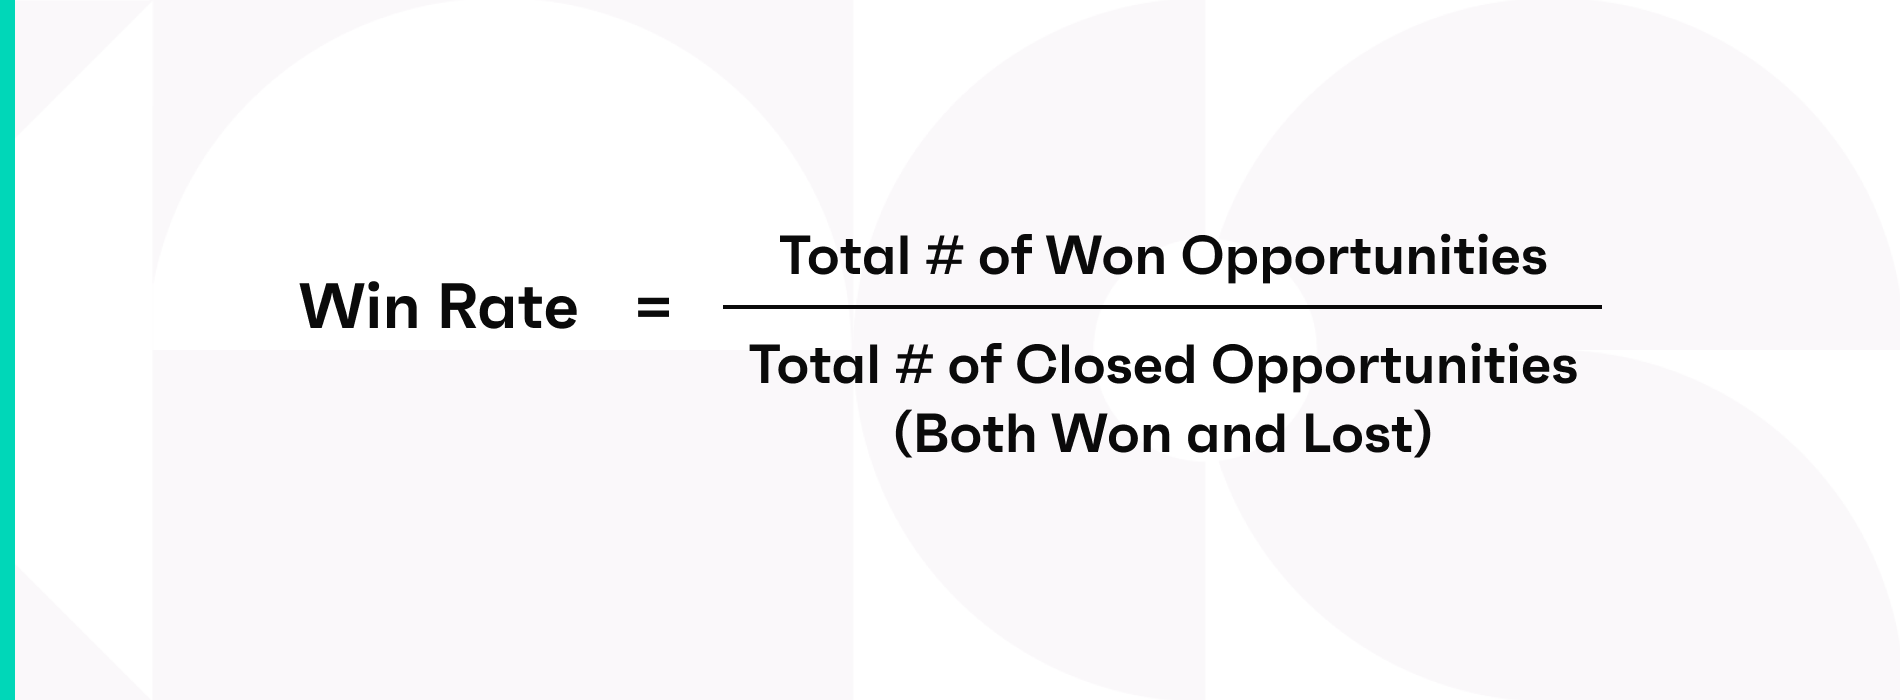 Win rate = total # of won opportunities / total # of closed opportunities (both won and lost)